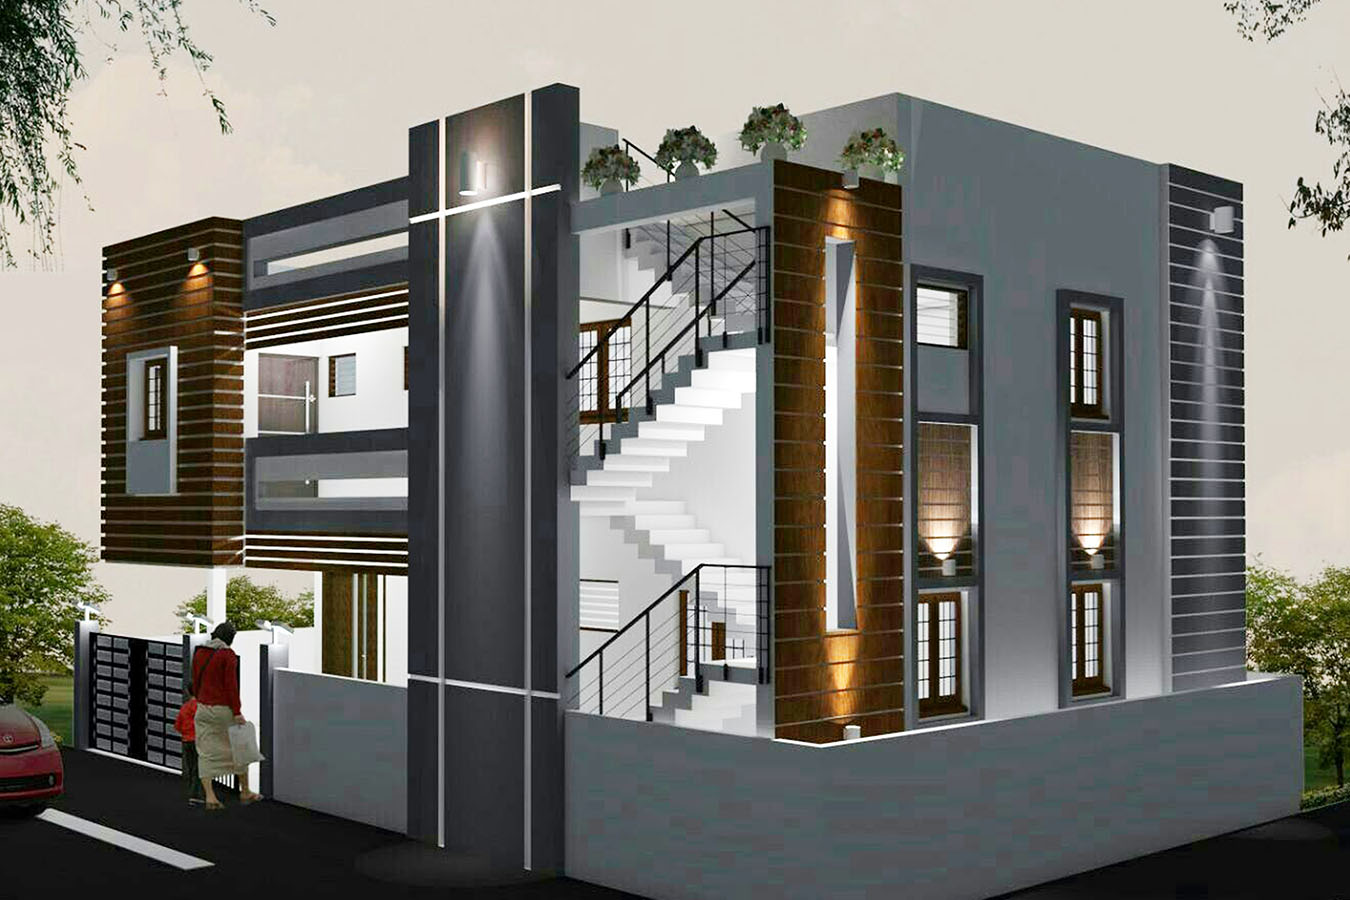 ompleted building projects in salem